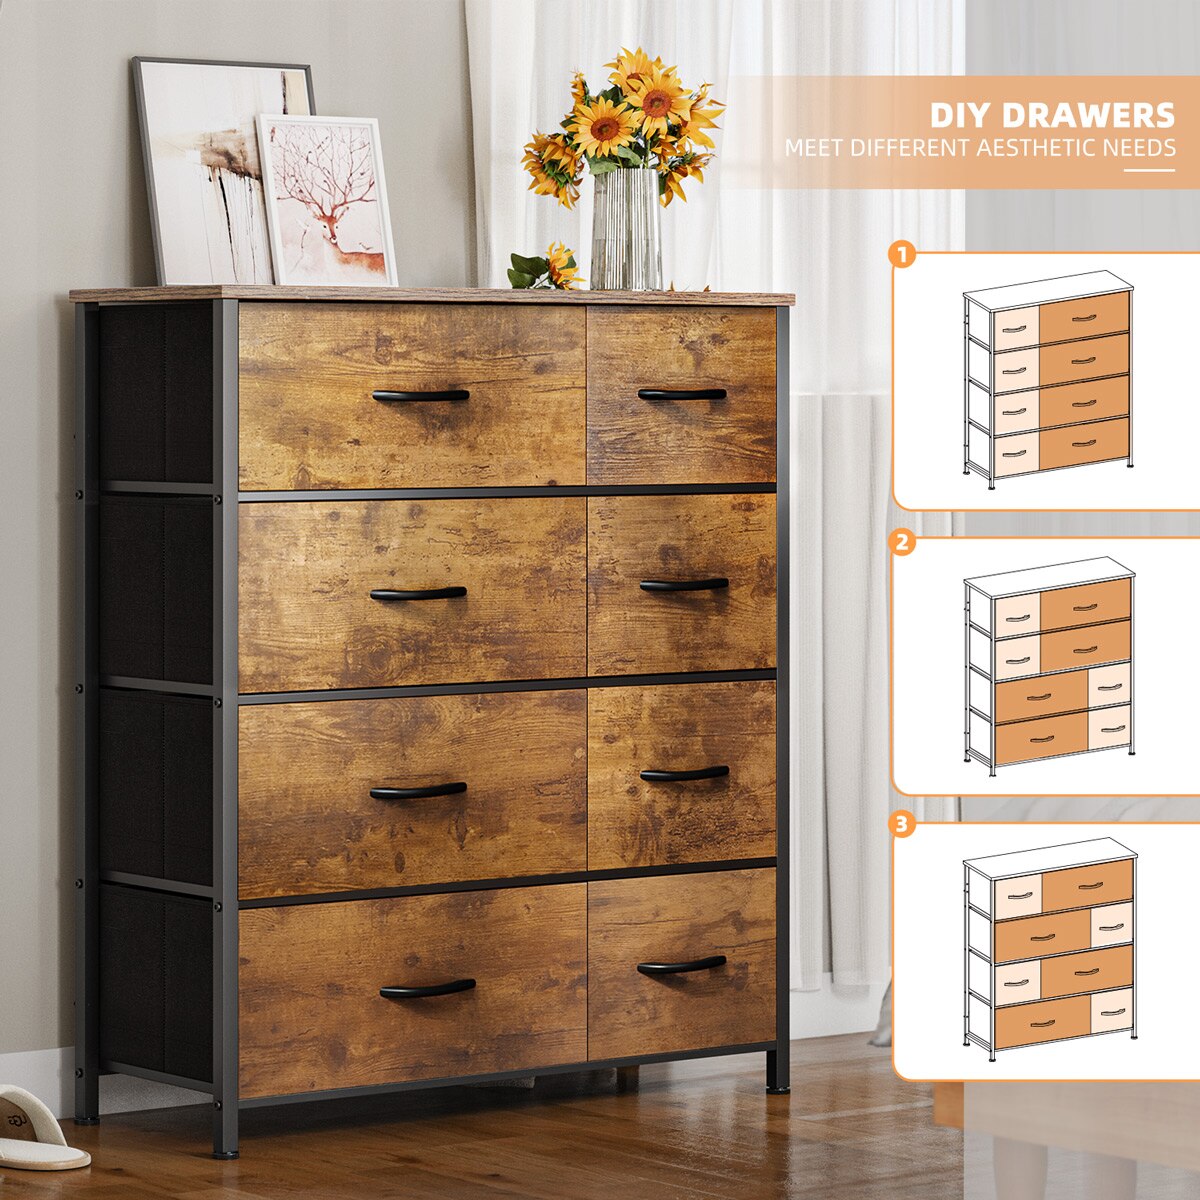 EnHomee 8 Drawer Dresser for Bedroom Fabric Dressers & Chest